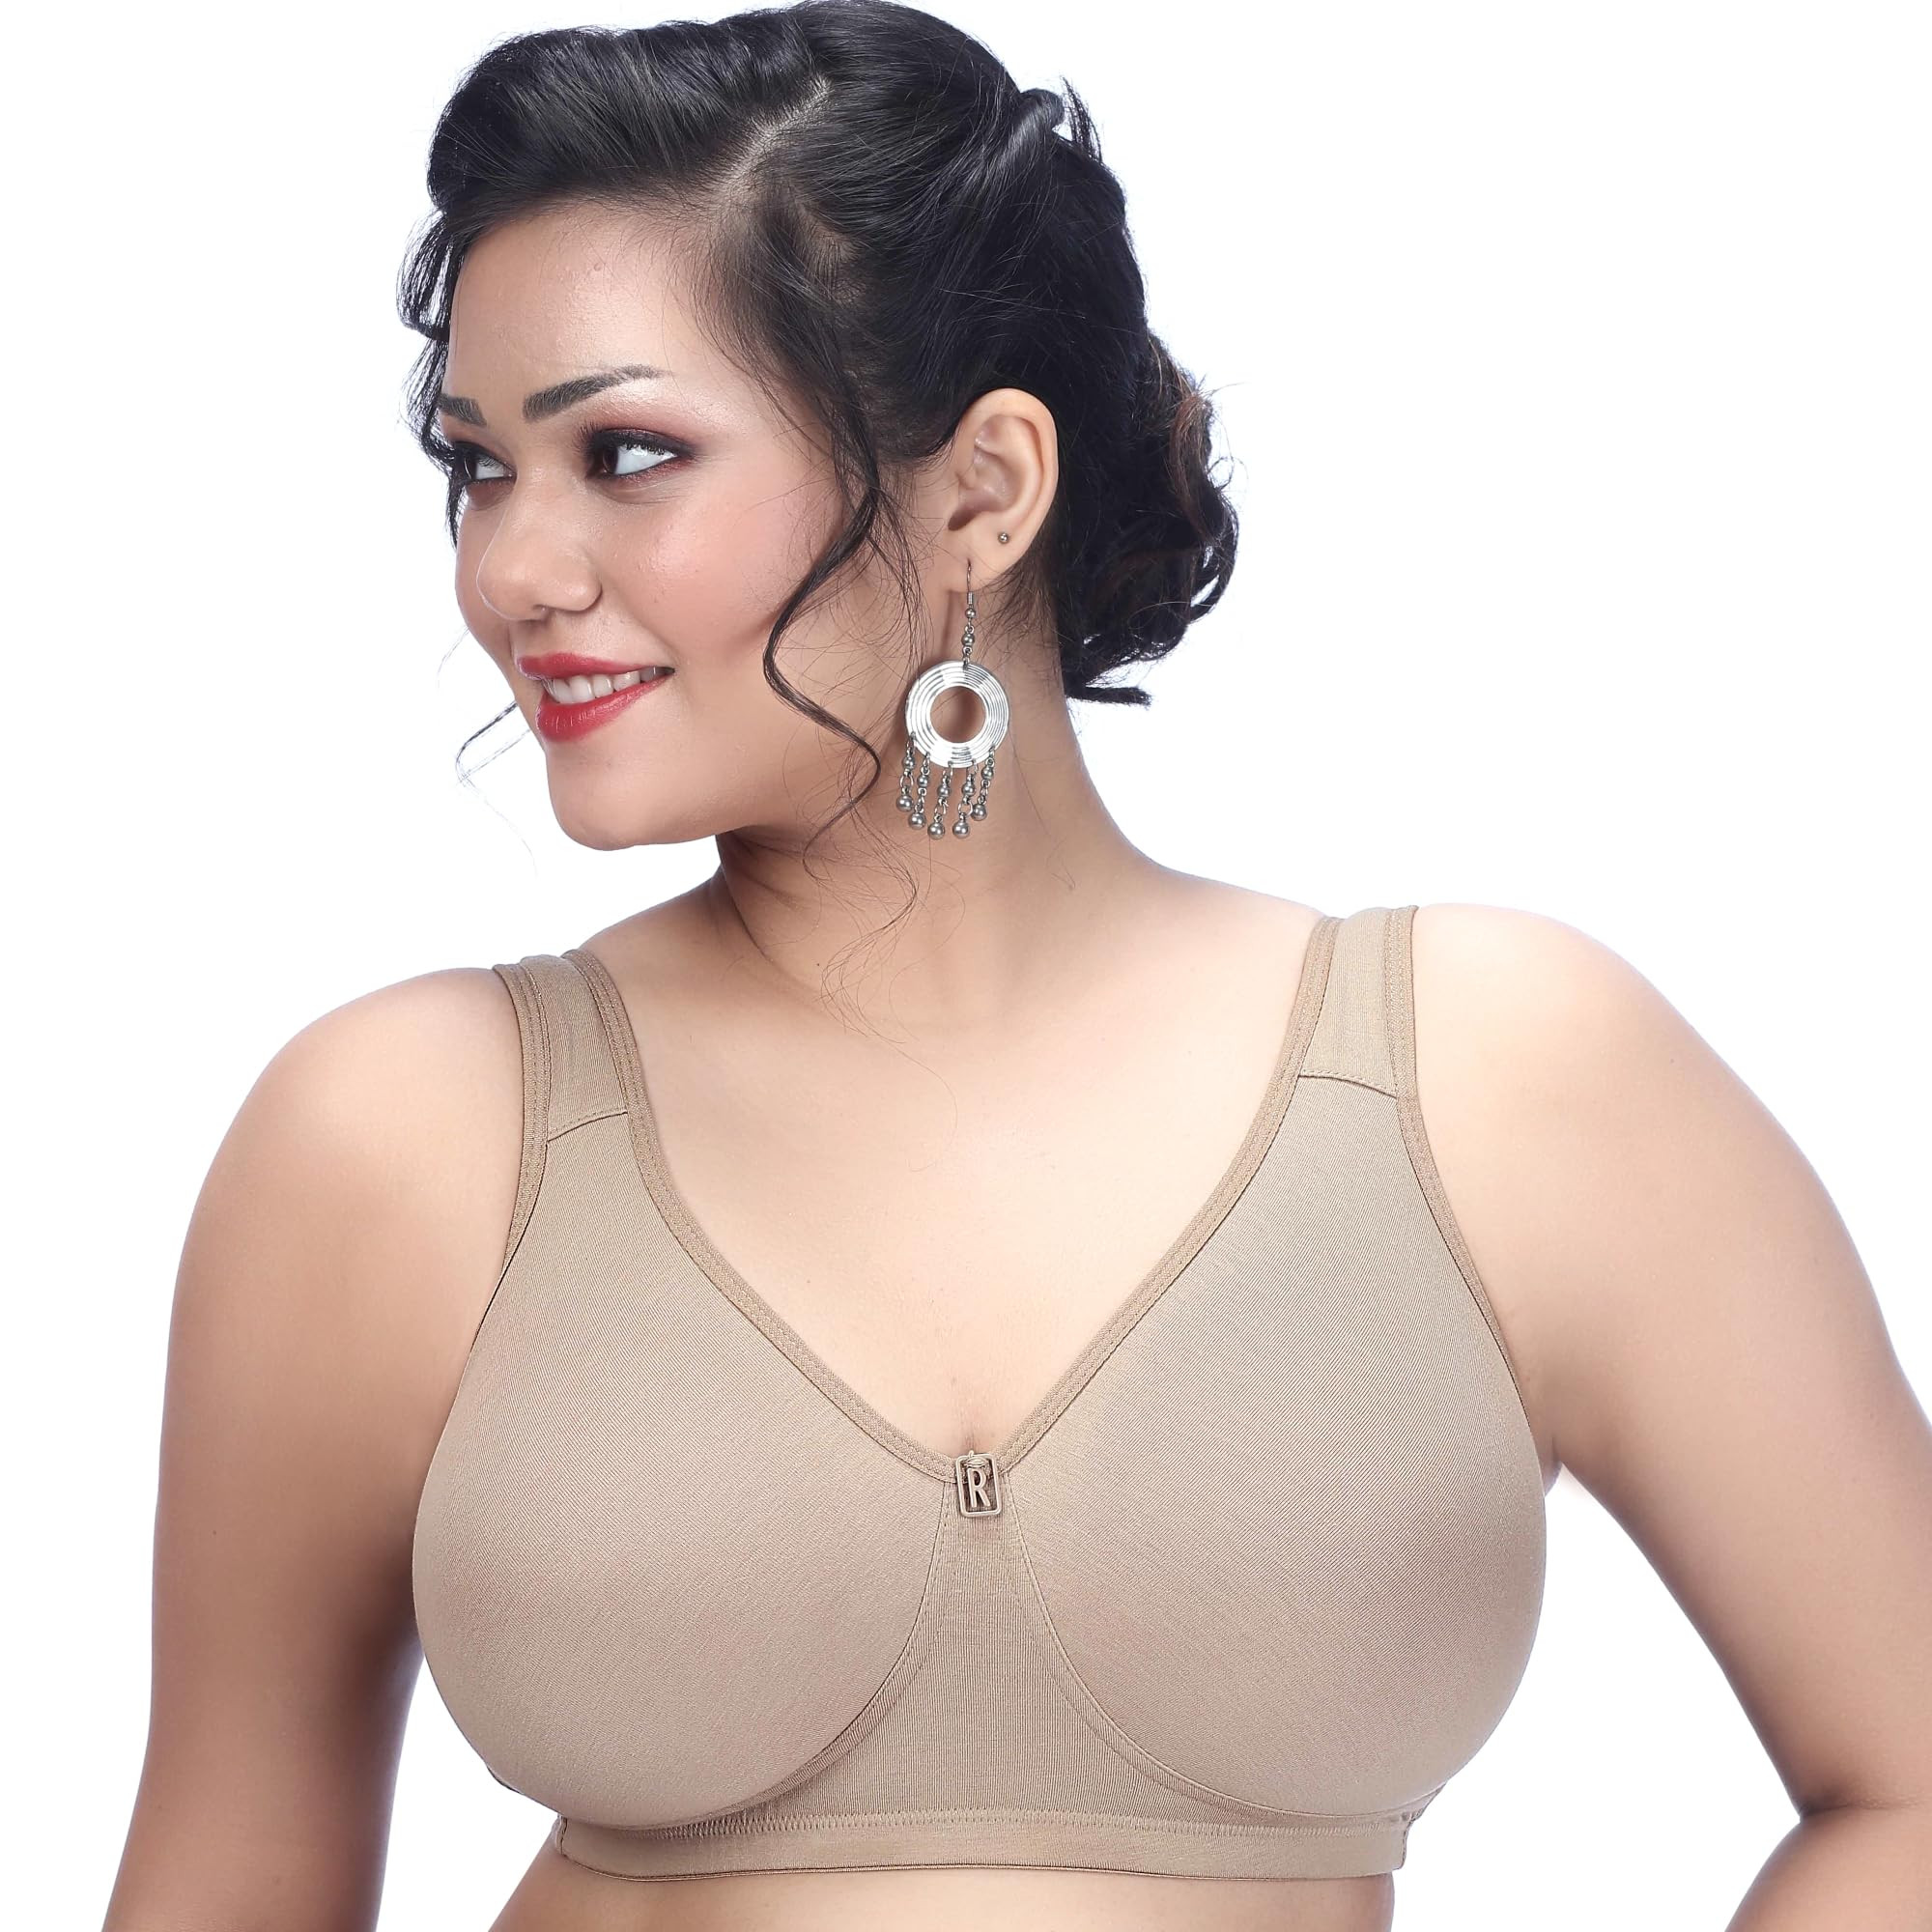 TRYLO COMFORTFIT 32 Nude B - Cup,Size 32B